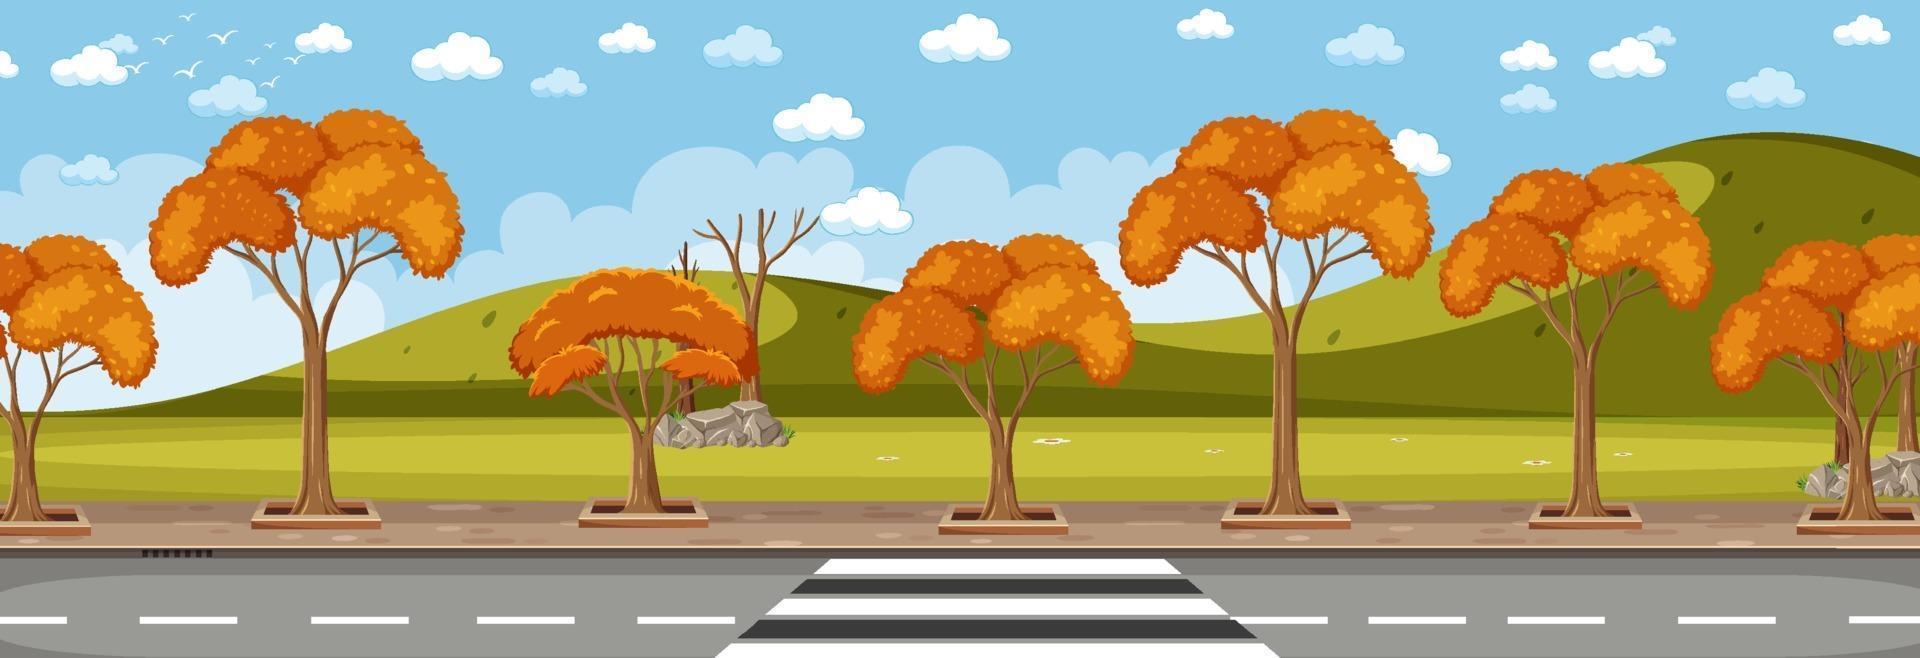 Park along the street in autumn season horizontal scene at day time vector